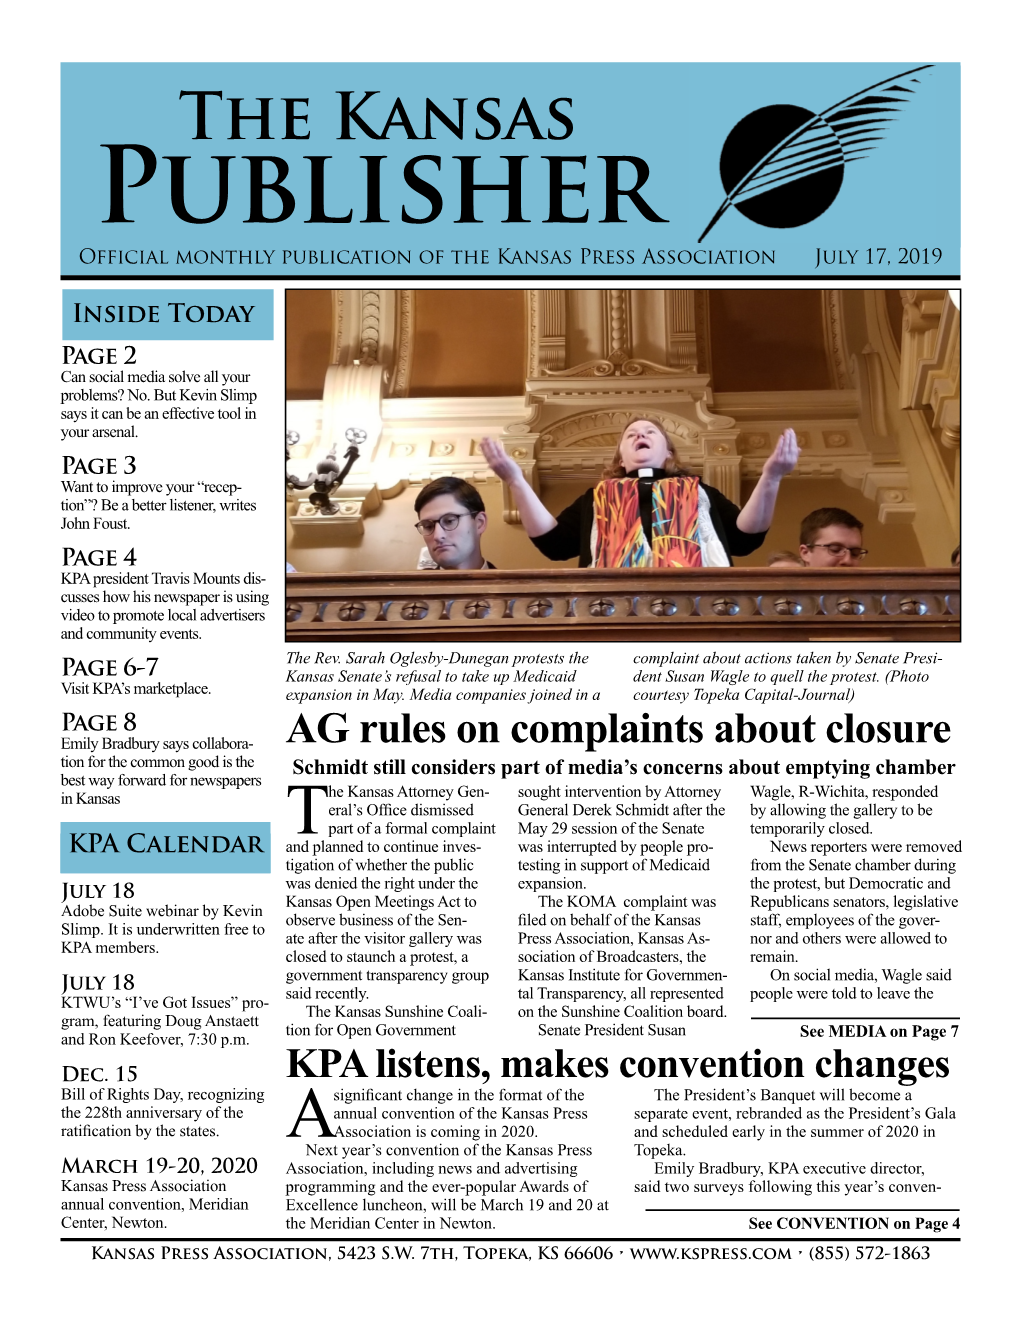 Kansas Publisher Official Monthly Publication of the Kansas Press Association July 17, 2019